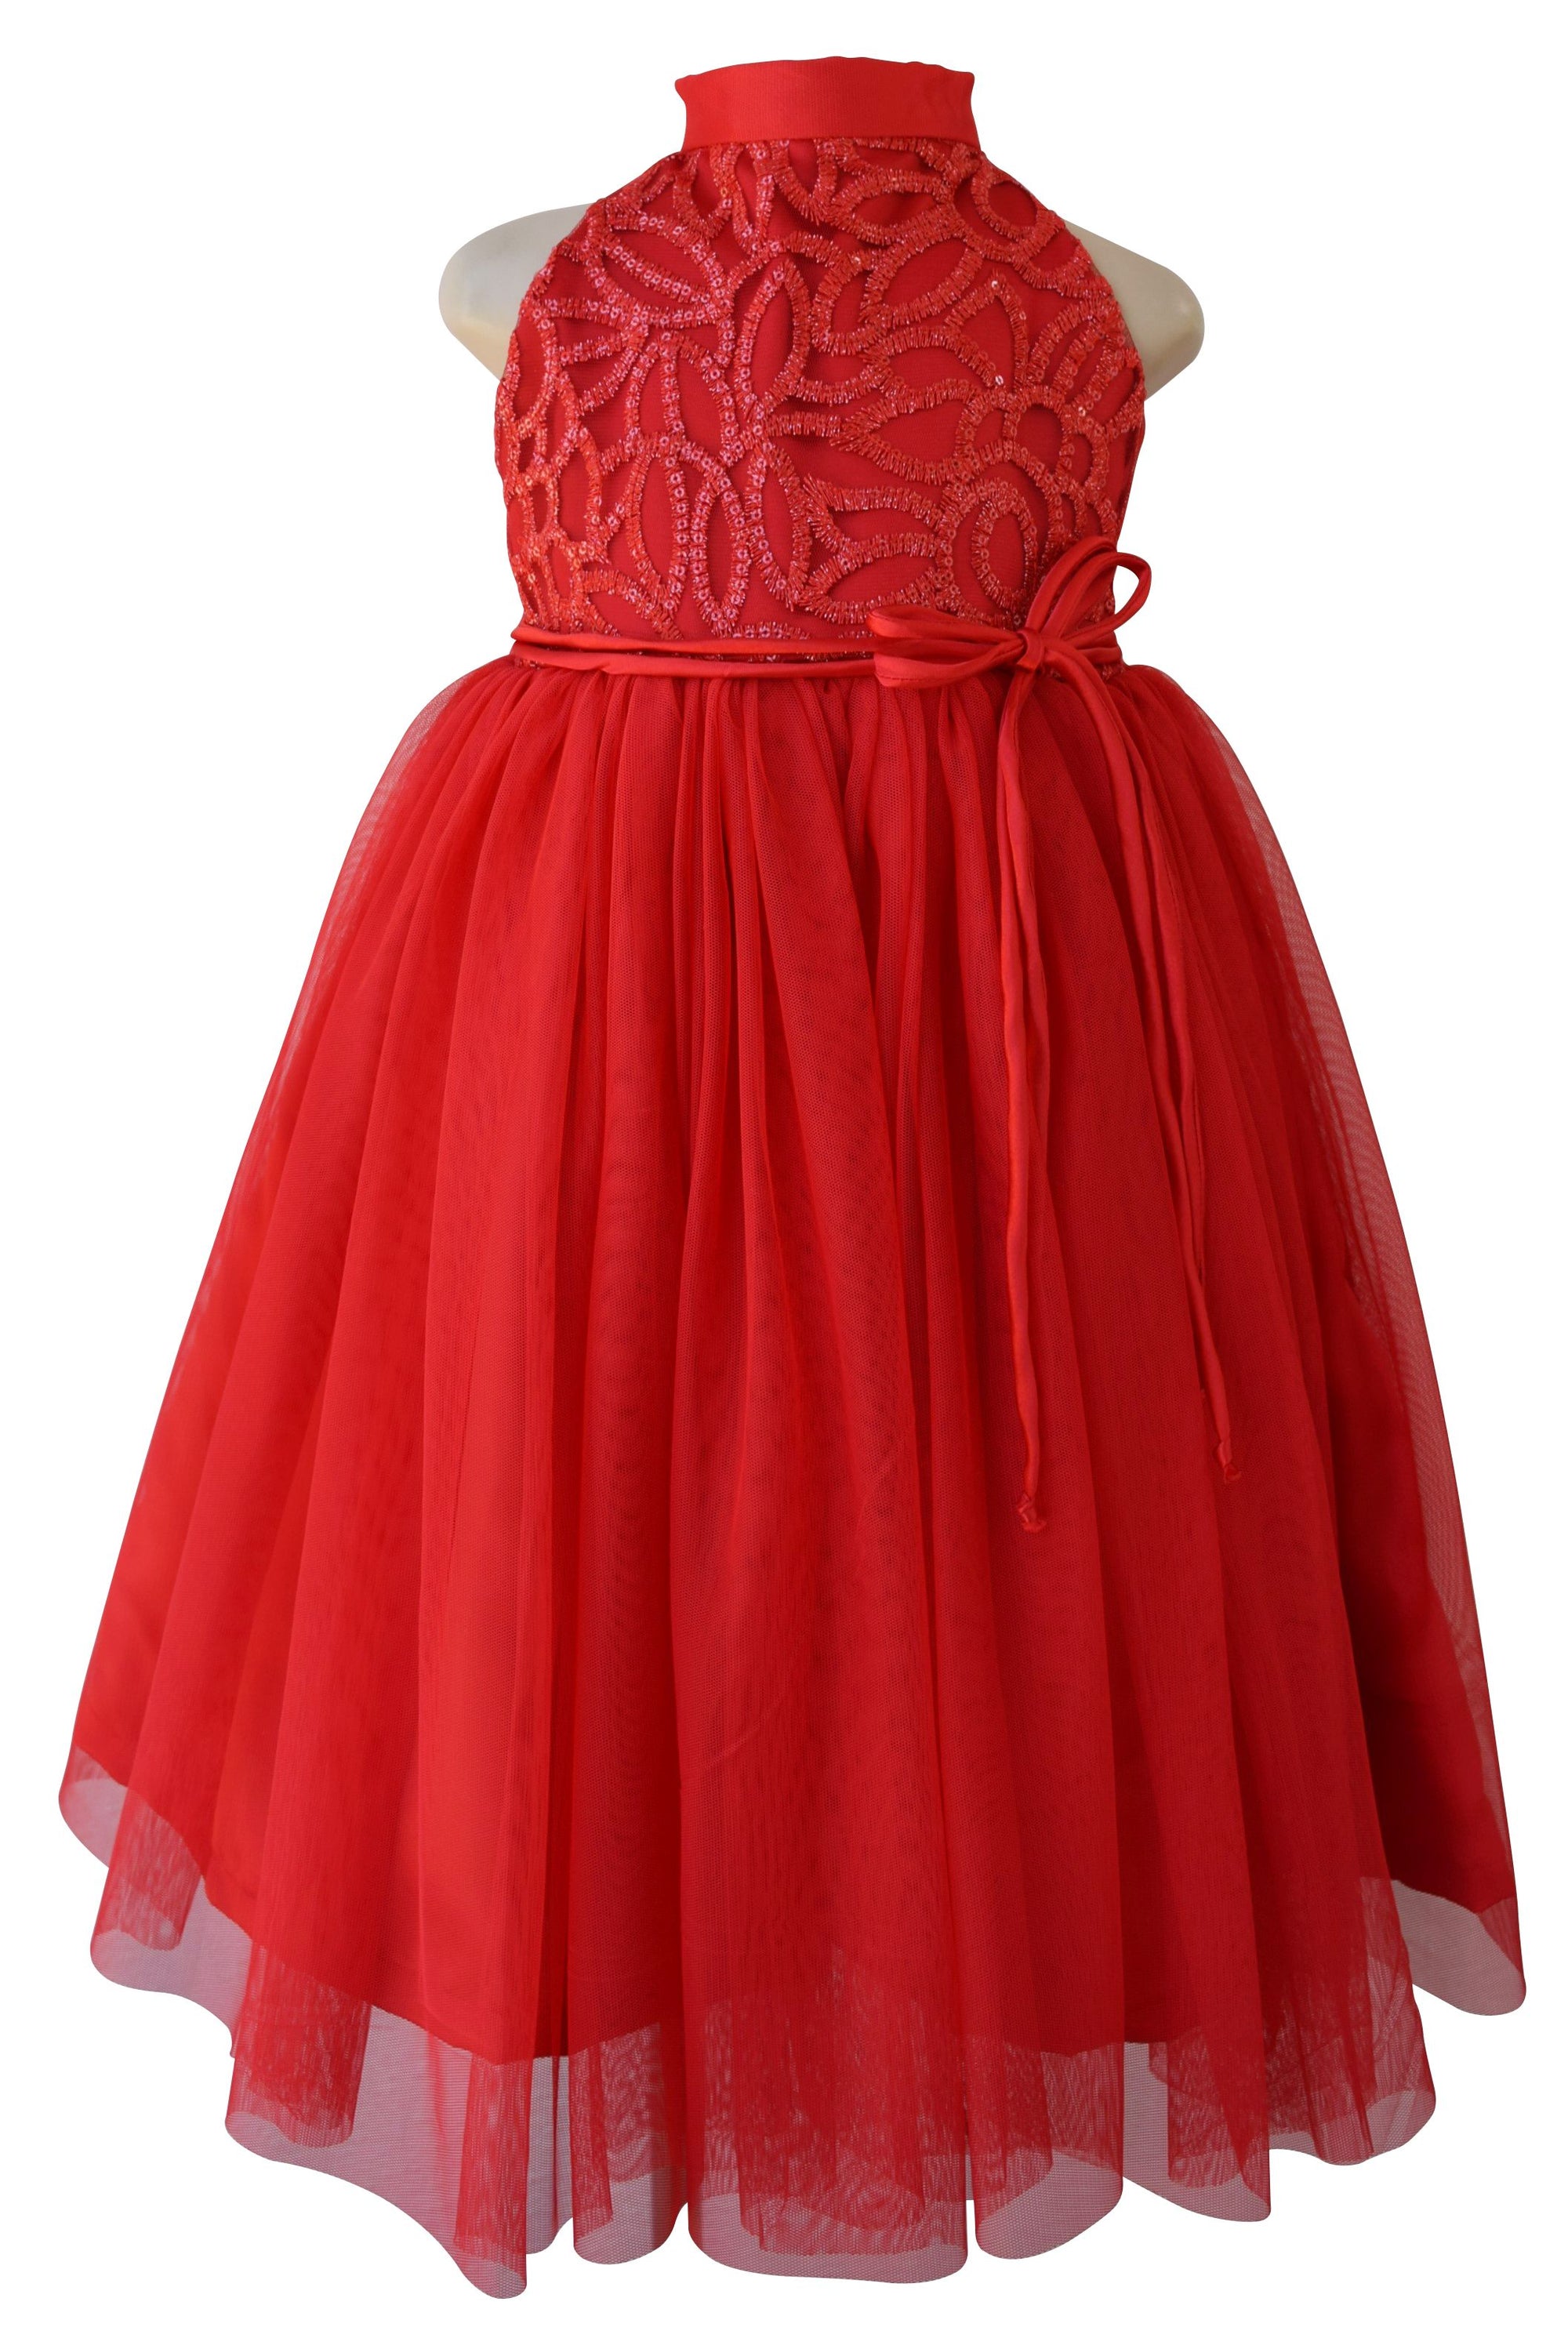 Buy THE LONDON STORE Baby Girl's Red Organza Kids Ball Gown (2-Years, Red)  at Amazon.in